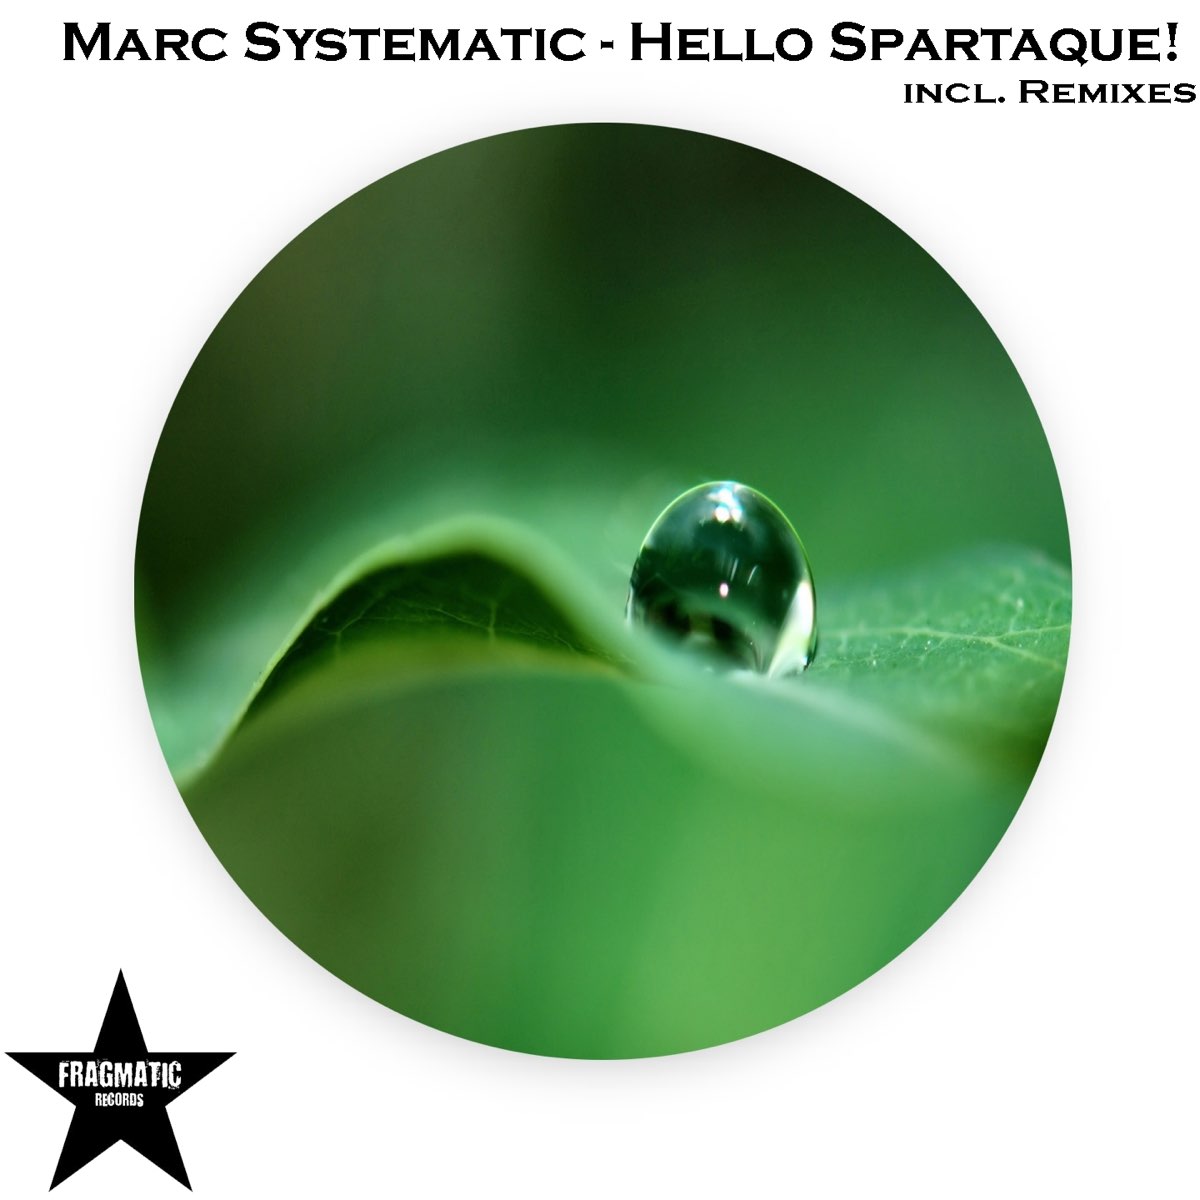 Mark System. Hellow System. Fragmatic. Listening marking System. Hello system